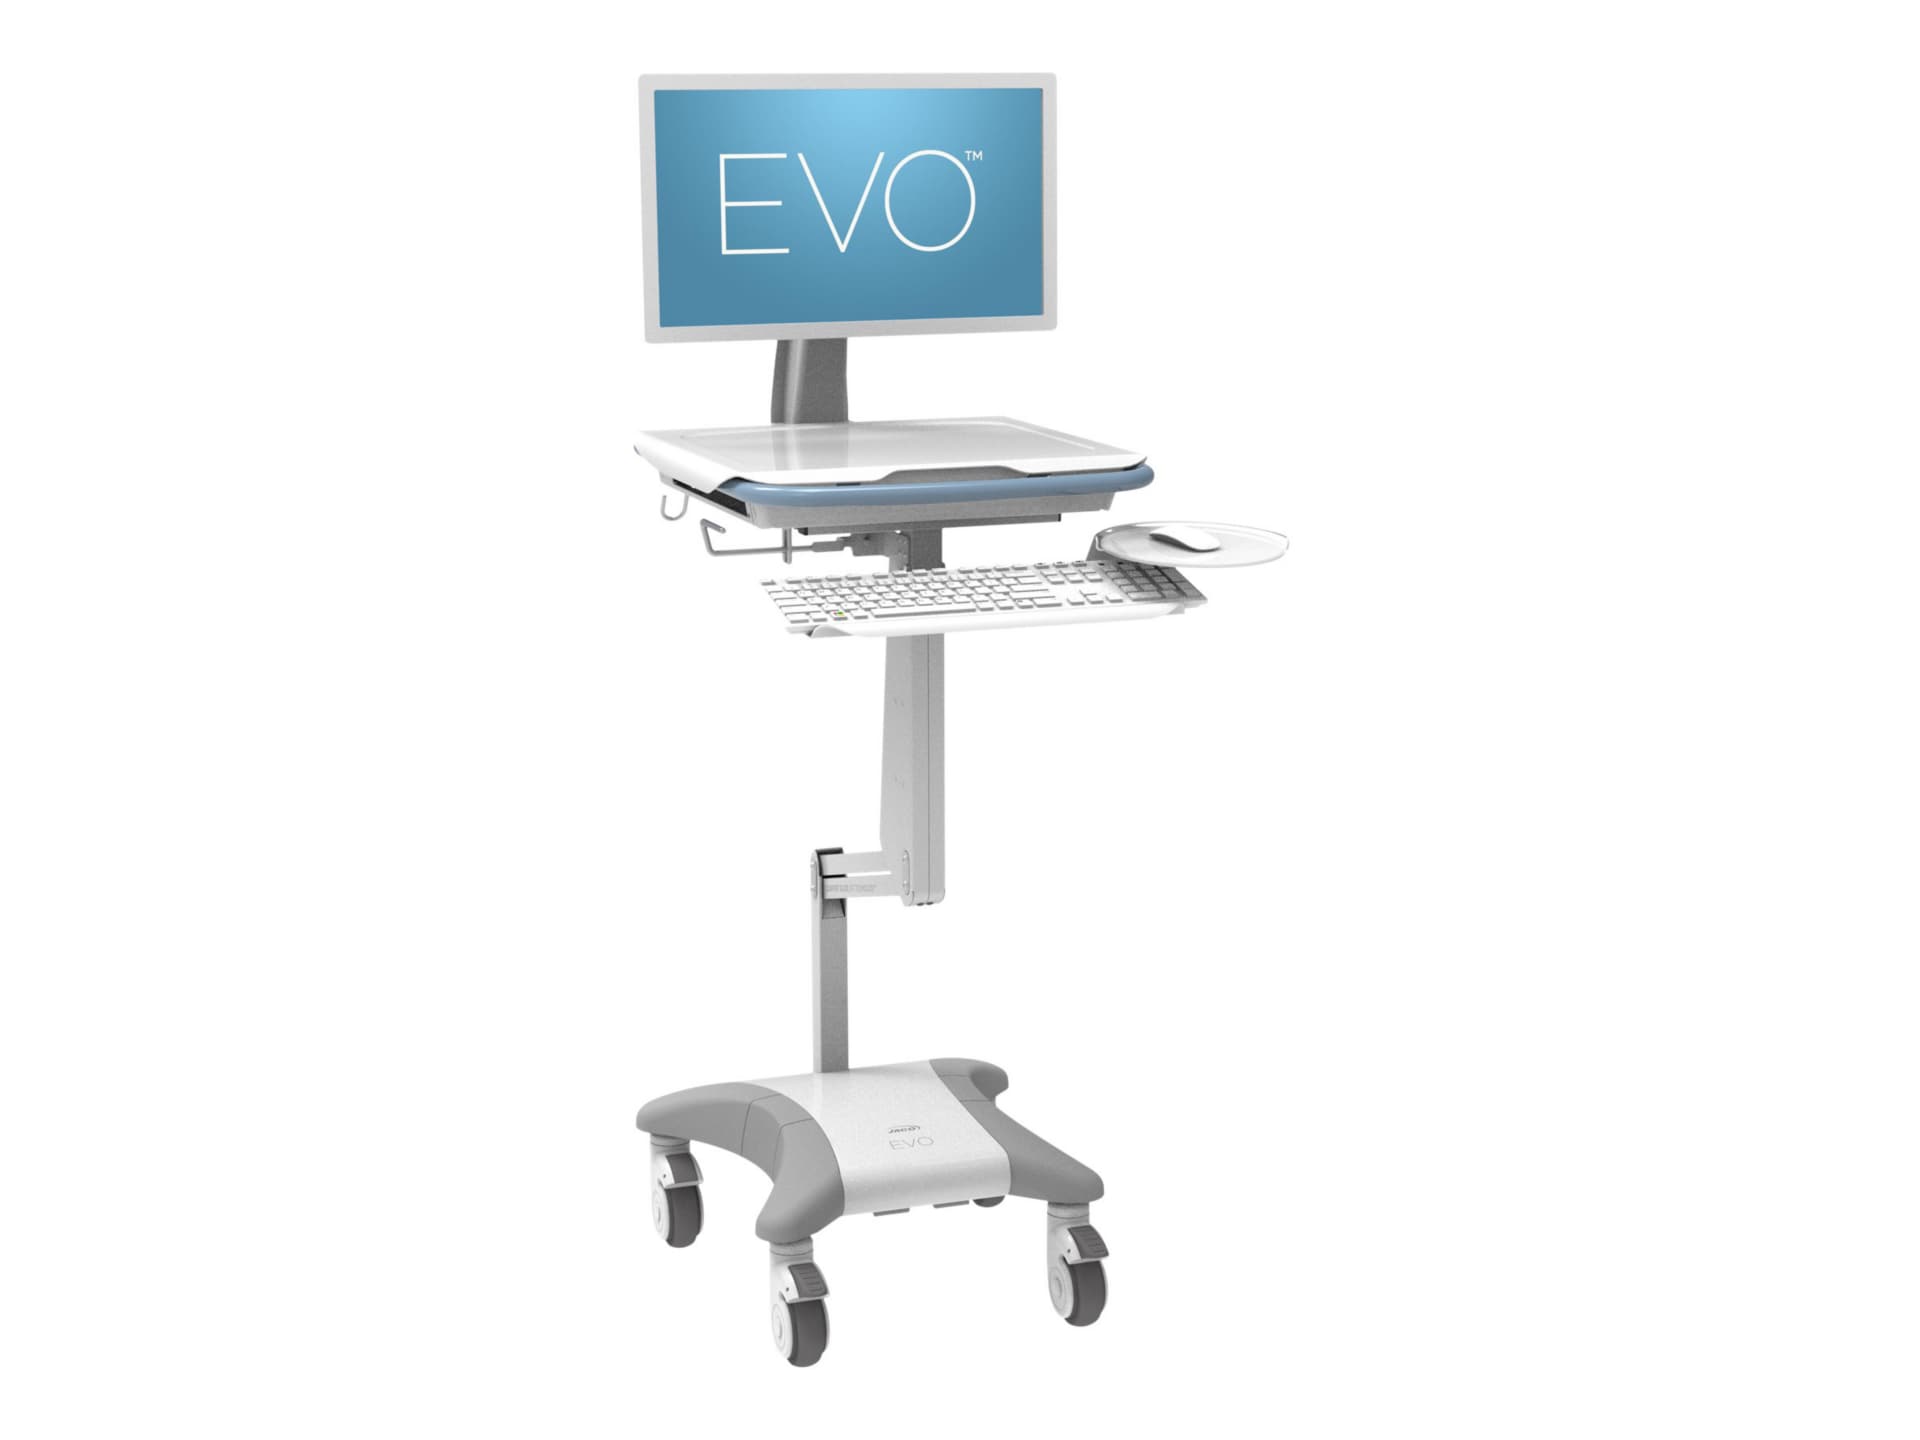 JACO EVO SE - cart - for PC, LCD monitor and keyboard - non-powered